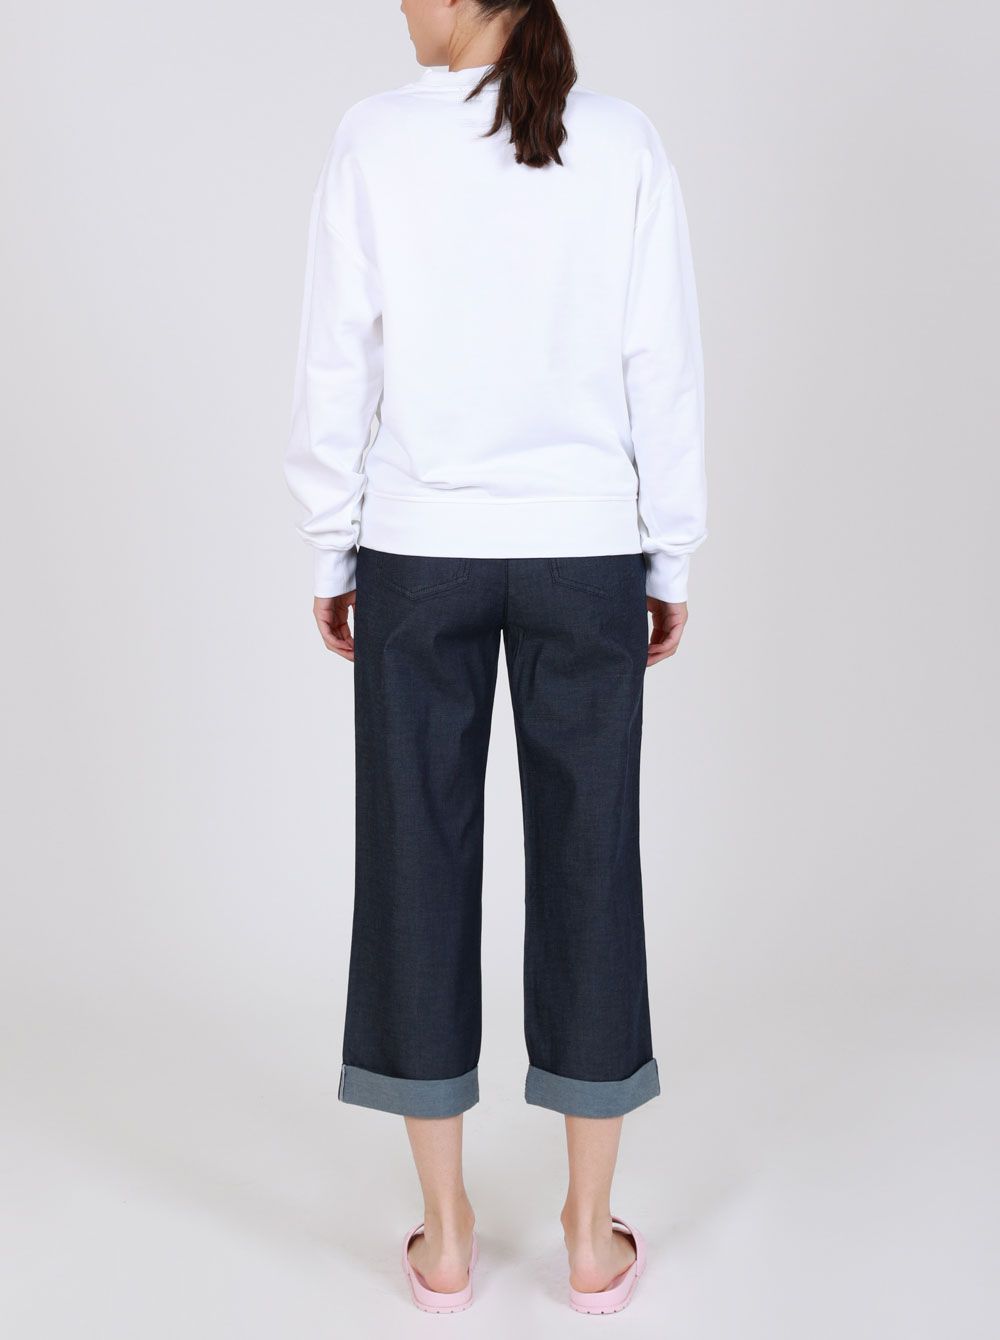 Love Moschino Chic Blue Cotton Trousers with Elegant Turn-Up